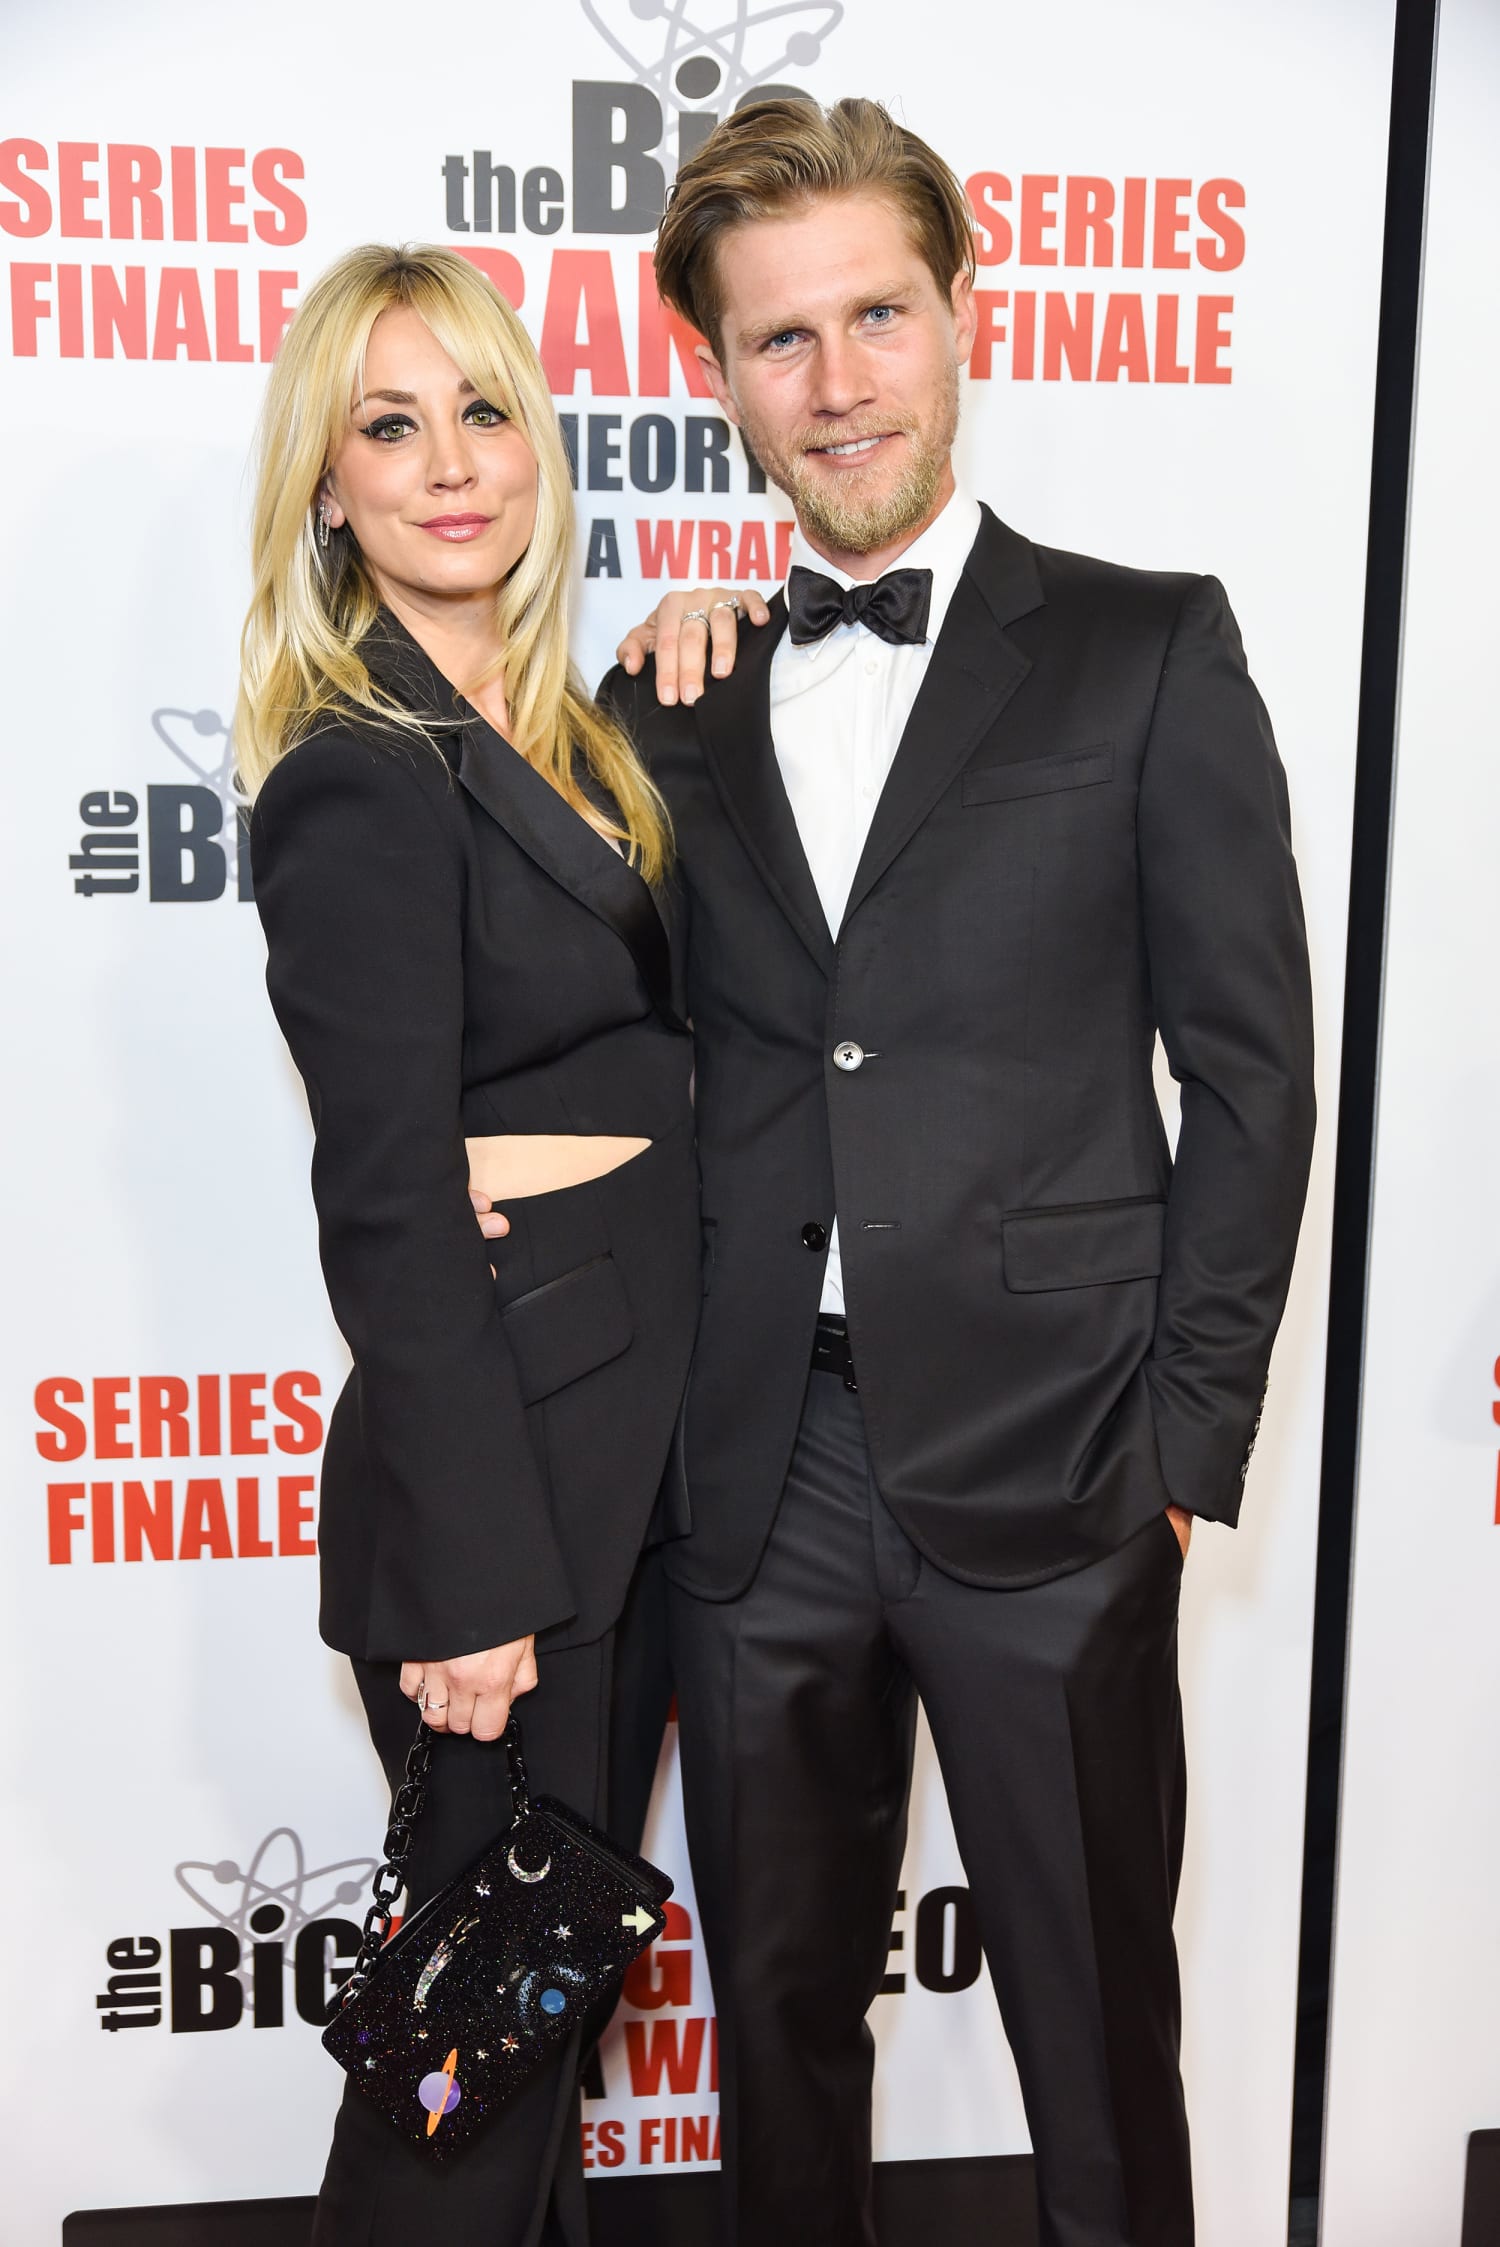 Kaley Cuoco Reveals Why She And Husband Karl Cook Don T Live Together Kaley cuoco's boyfriend karl cook cuddles up to her ex johnny galecki: https www today com popculture kaley cuoco reveals she husband karl cook don t live t160784